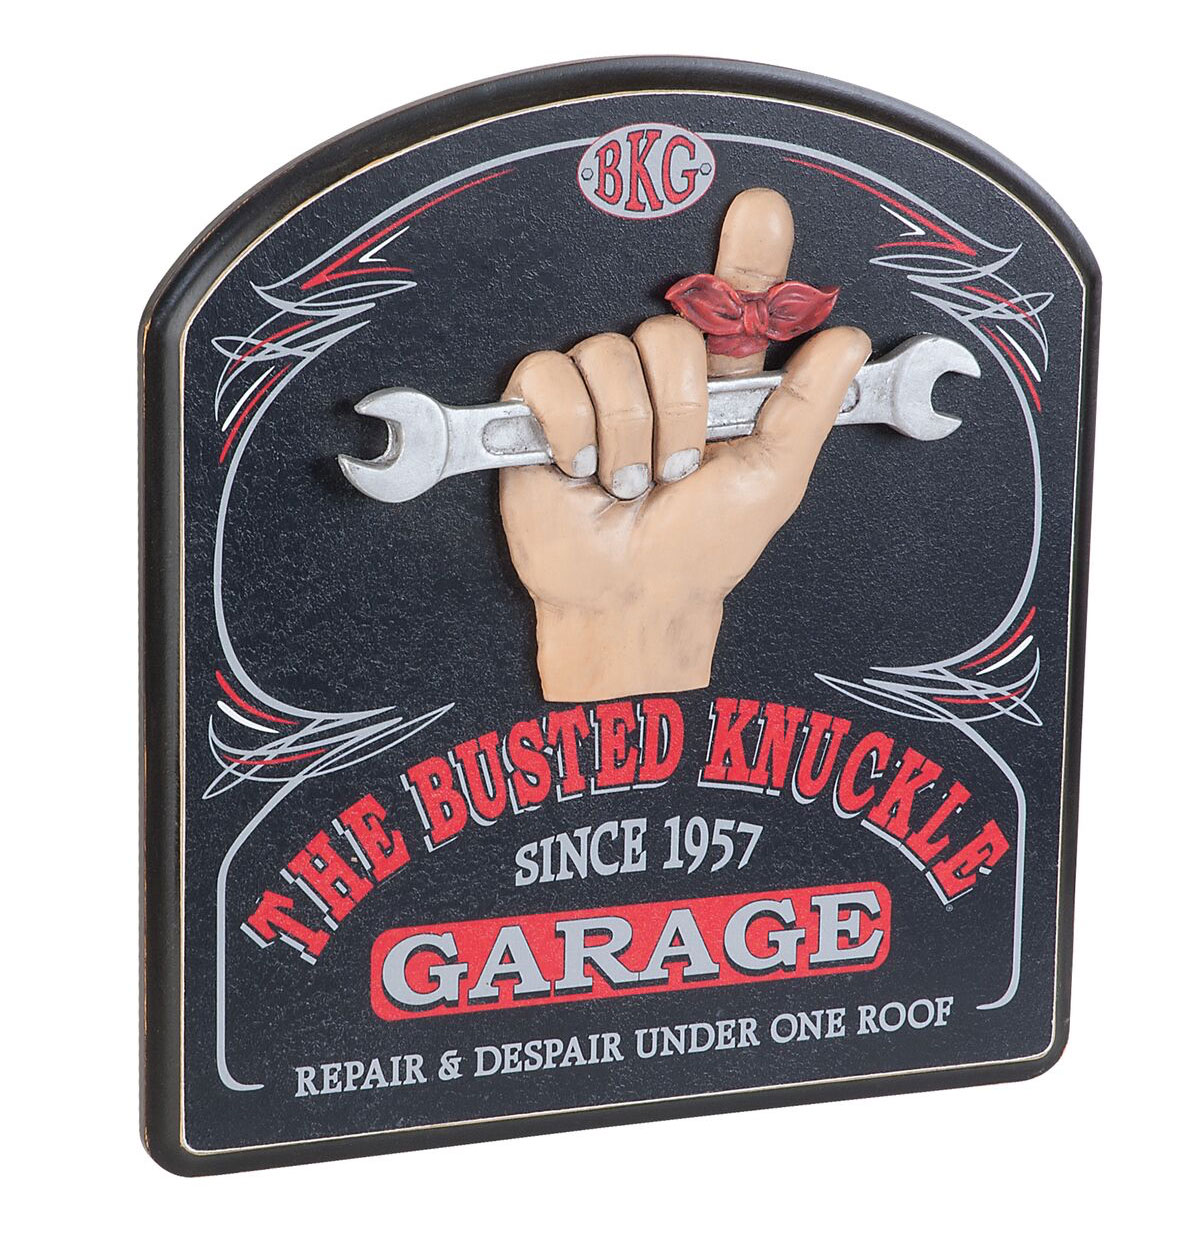 The Busted Knuckle Garage Wand Bord